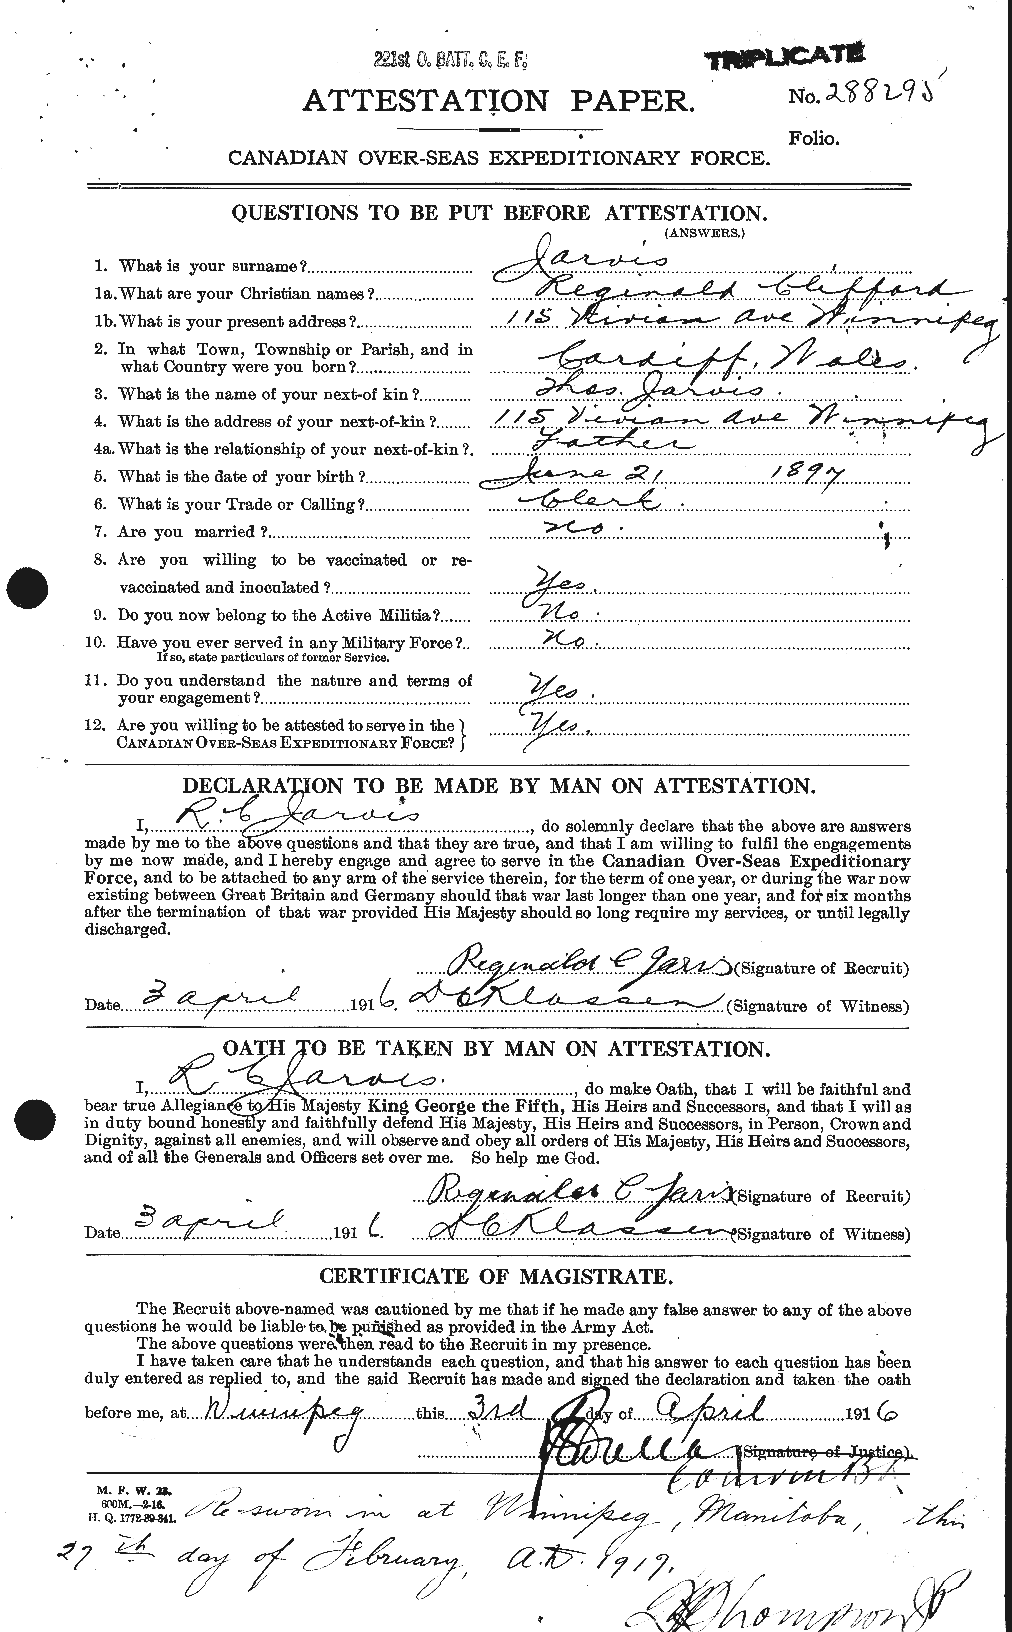 Personnel Records of the First World War - CEF 415848a